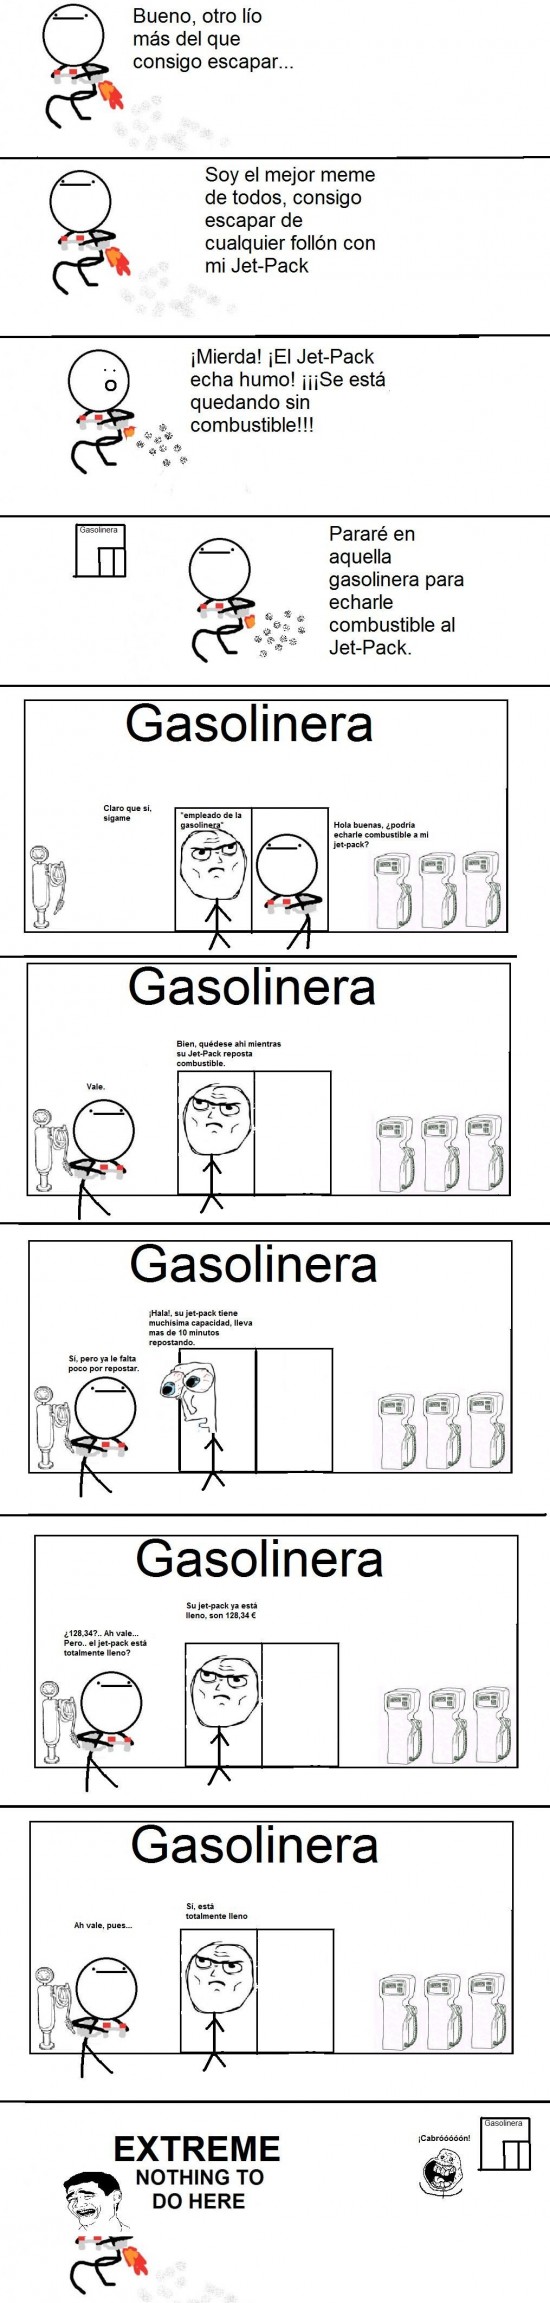 combustible,extreme,gasolina,gasolinera,jet-pack,nothing to do here